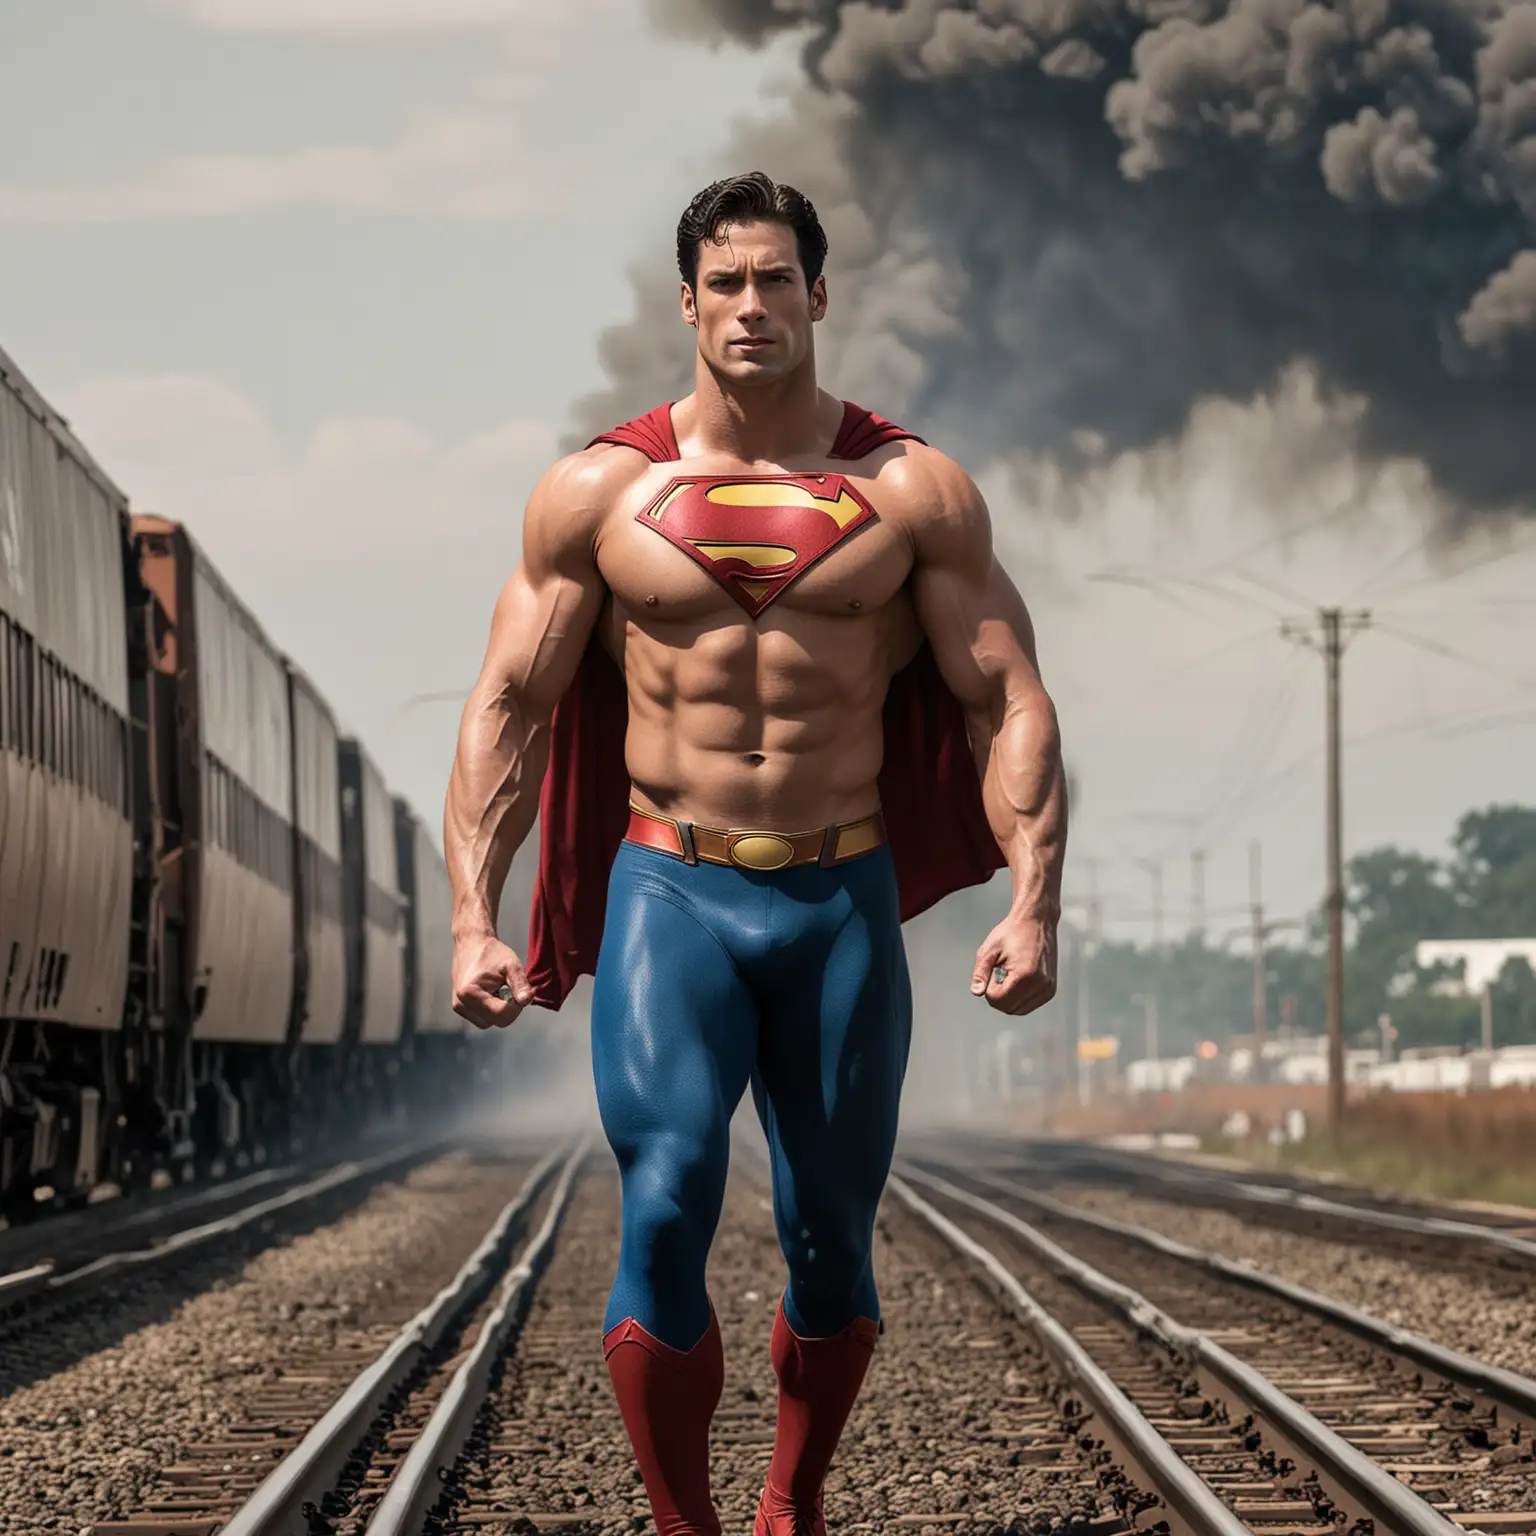 Muscular Superman Halting Oncoming Train with Bare Chest